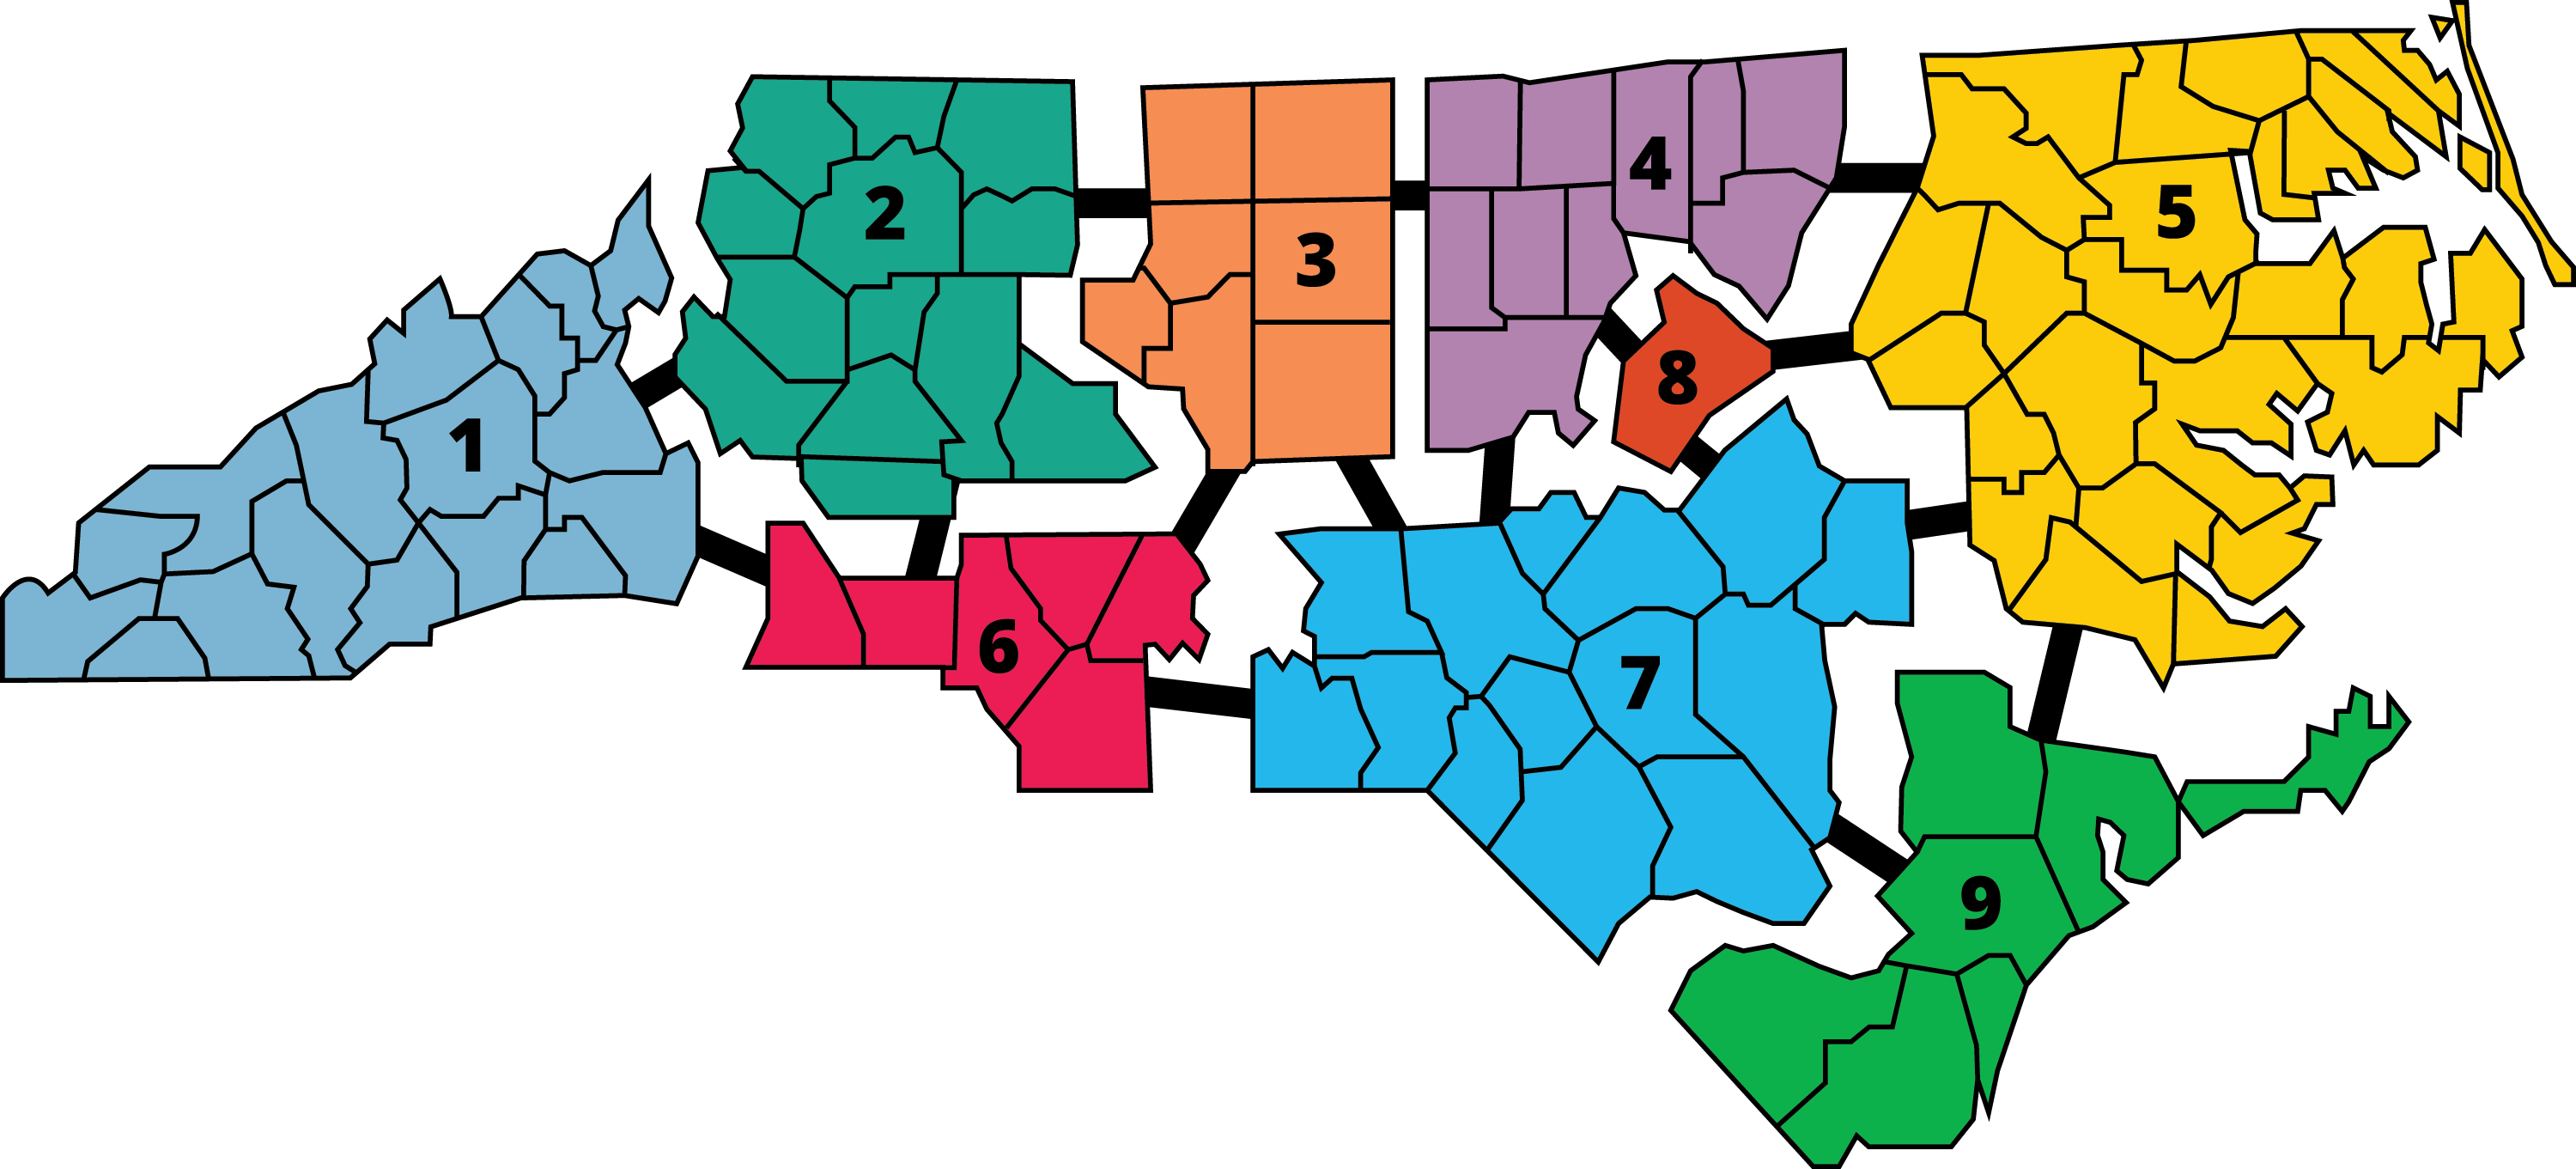 Districts Image Map